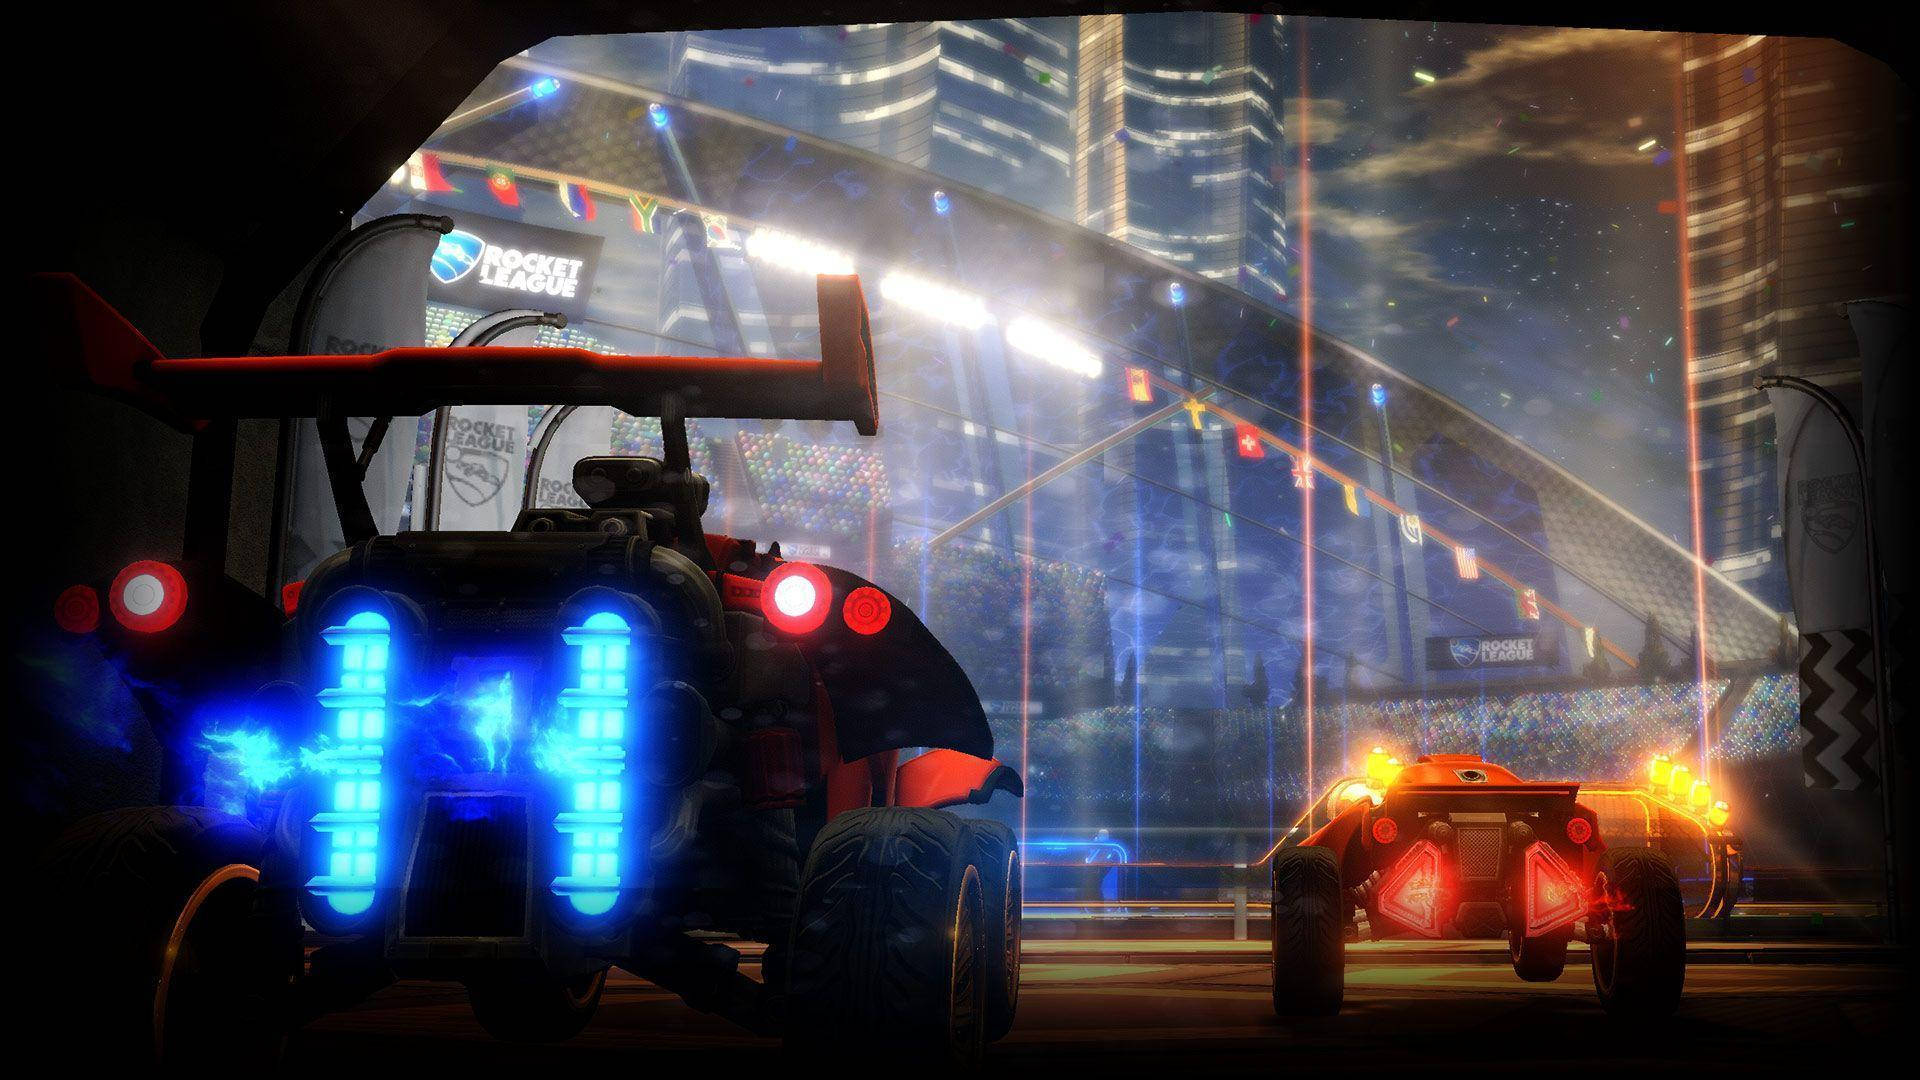 Boost your way to victory in Rocket League! Wallpaper